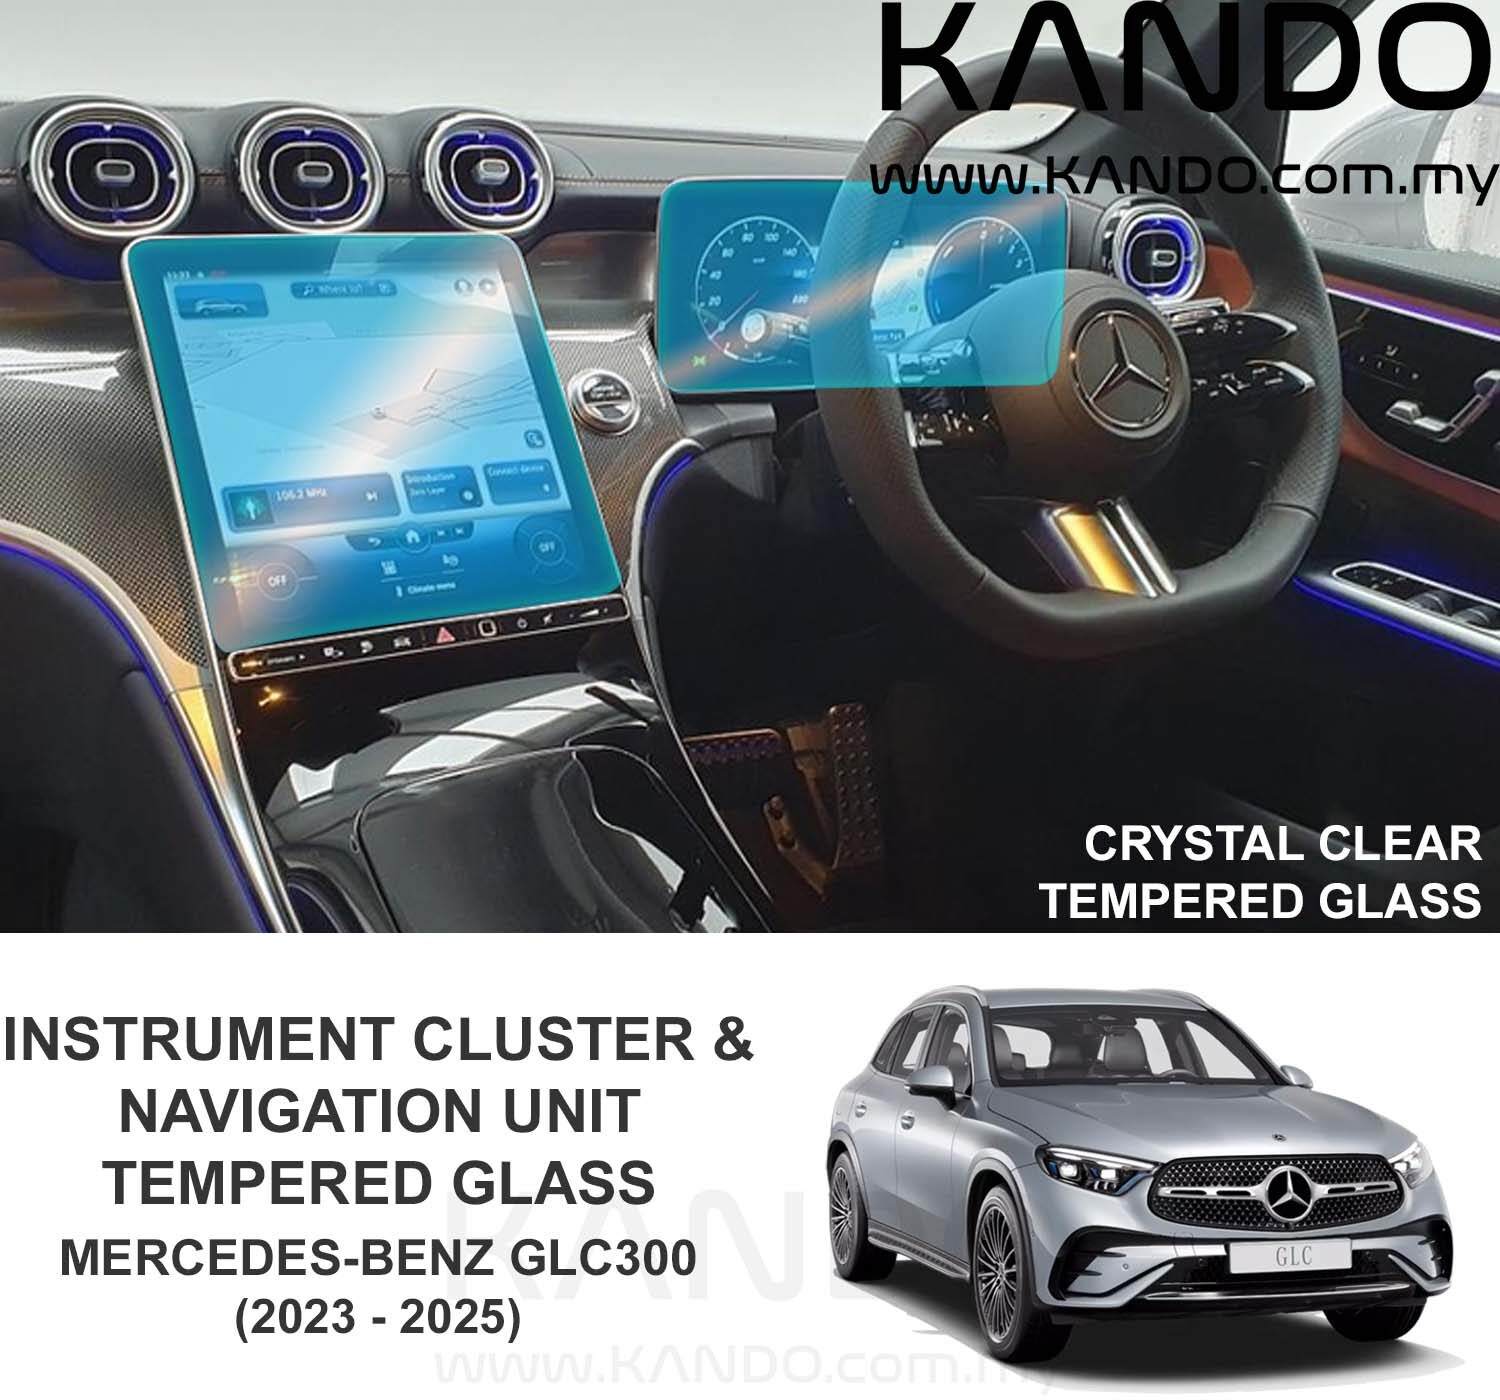 Mercedes Benz GLC X254 Tempered Glass Protector Mercedes GLC Tempered Glass Protector GLC GPS Screen Mercedes GLC Tempered Glass Mercedes GLC Tempered Glass Benz GLC Tempered Glass Benz GLC Tempered Glass Mercedes Tempered Glass